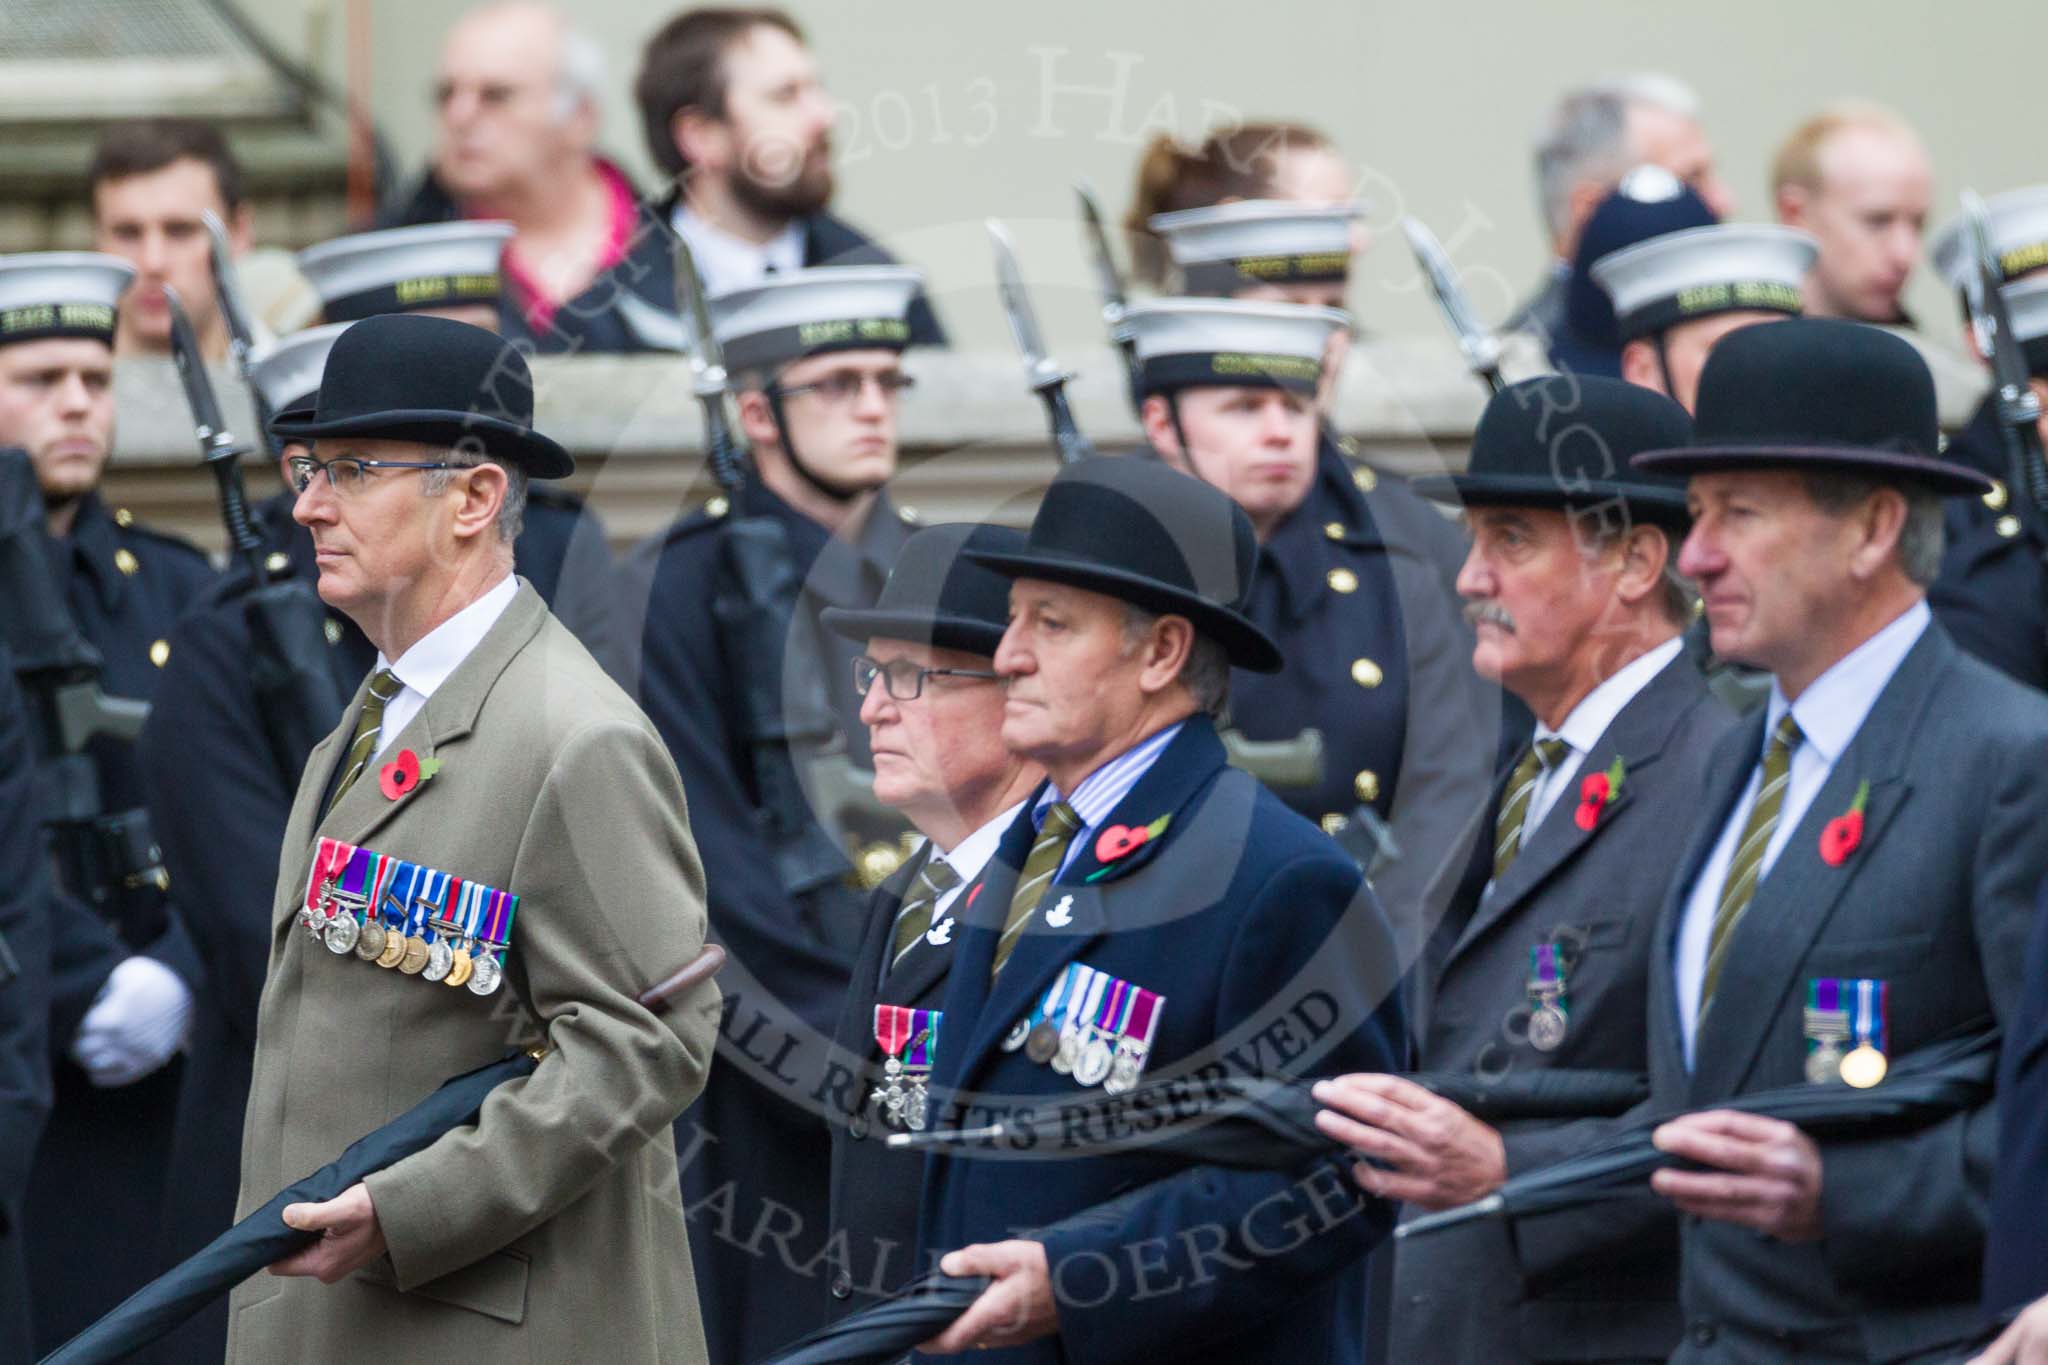 Remembrance Sunday at the Cenotaph 2015: Group A22, Green Howards Association.
Cenotaph, Whitehall, London SW1,
London,
Greater London,
United Kingdom,
on 08 November 2015 at 12:12, image #1342